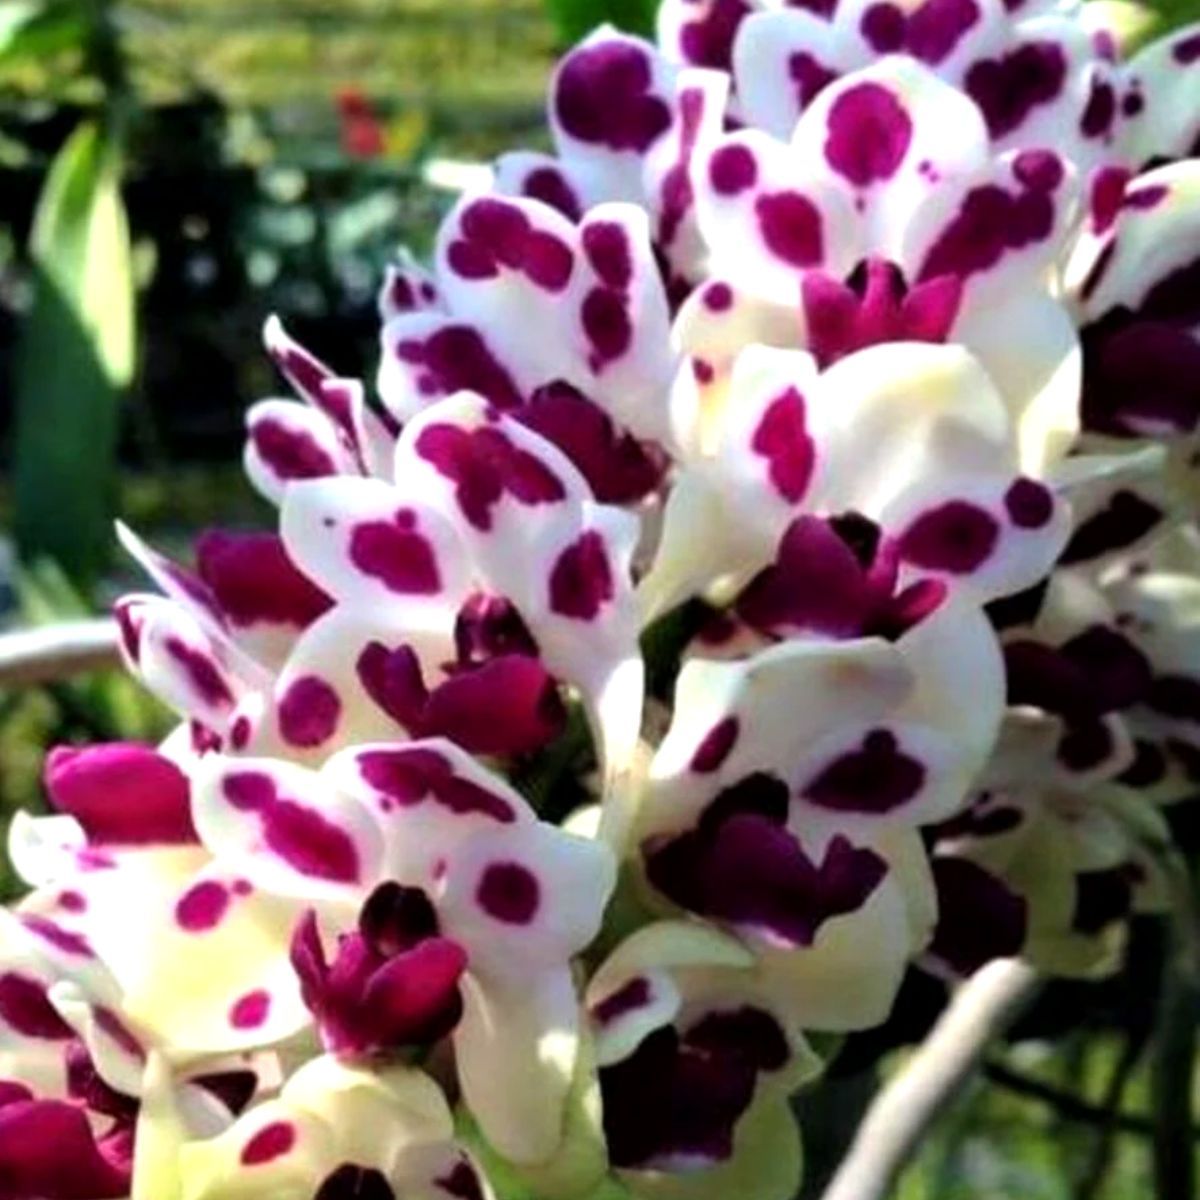 Rhynchostylis Gigantea Cartoon Orchid - Playfully Vibrant and Whimsical Floral Display